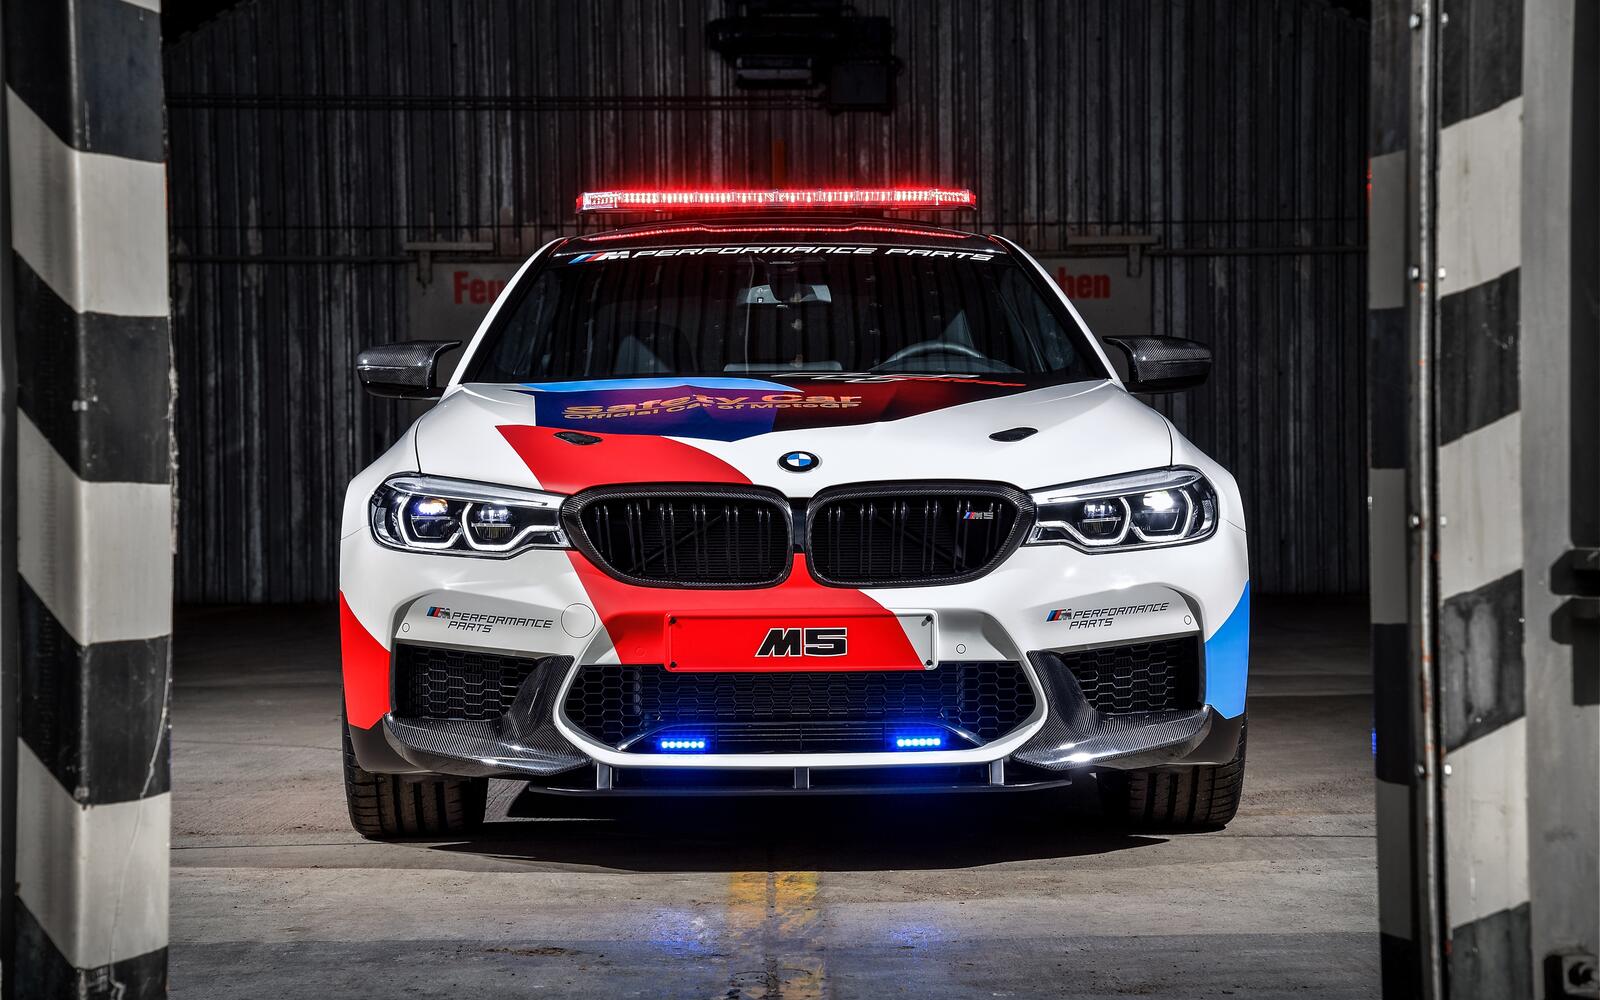 Free photo Bmw m5 in police paint with flashing lights